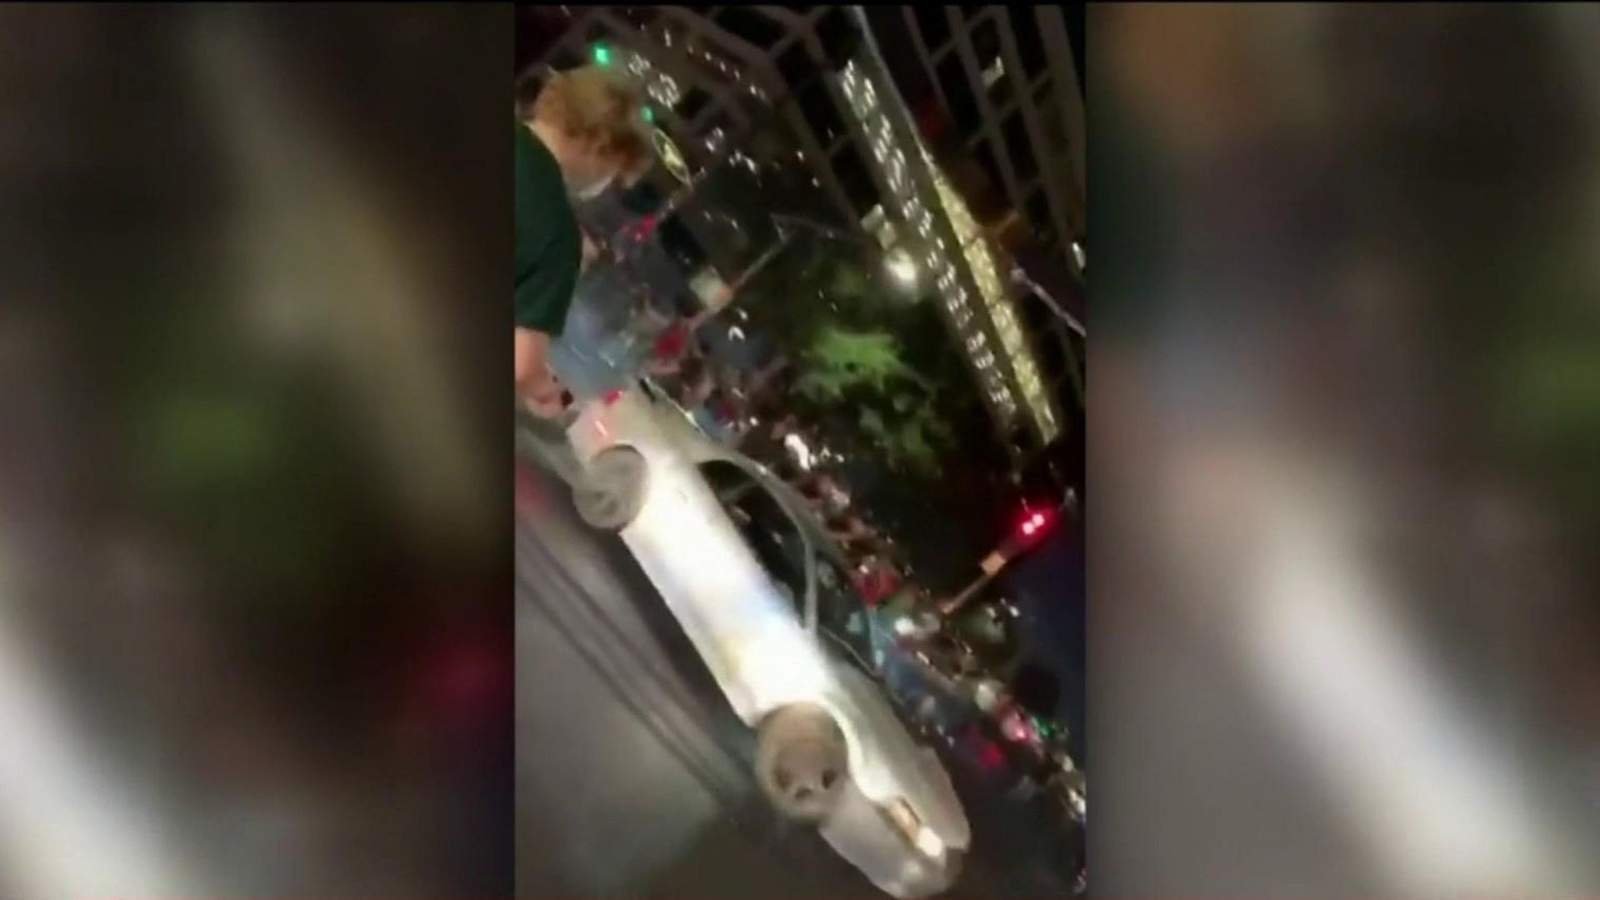 WATCH: Street racers shut down Westheimer and Sage intersection overnight